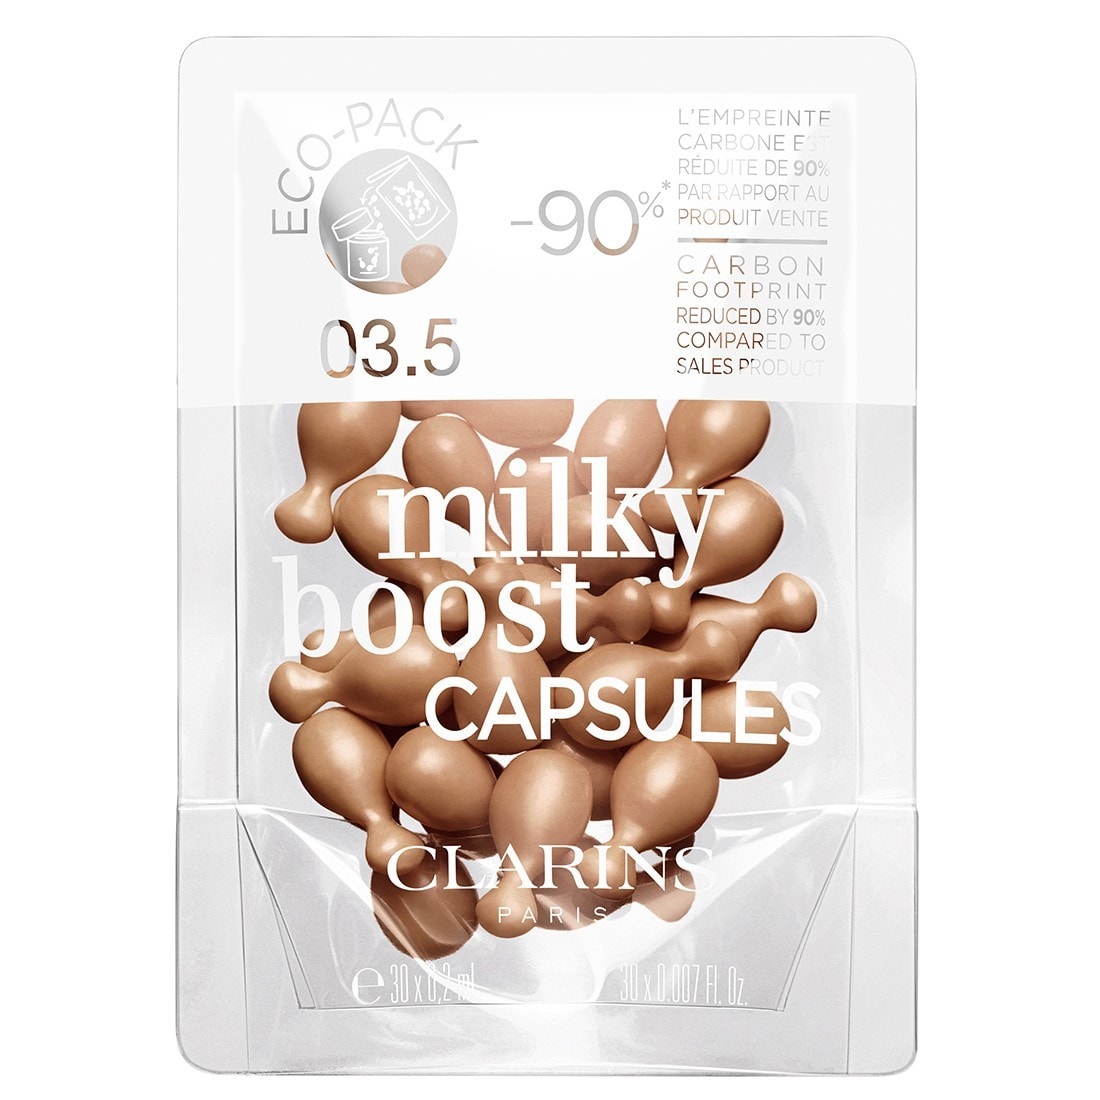 Clarins Milky Boost Capsules Refill, 03.5